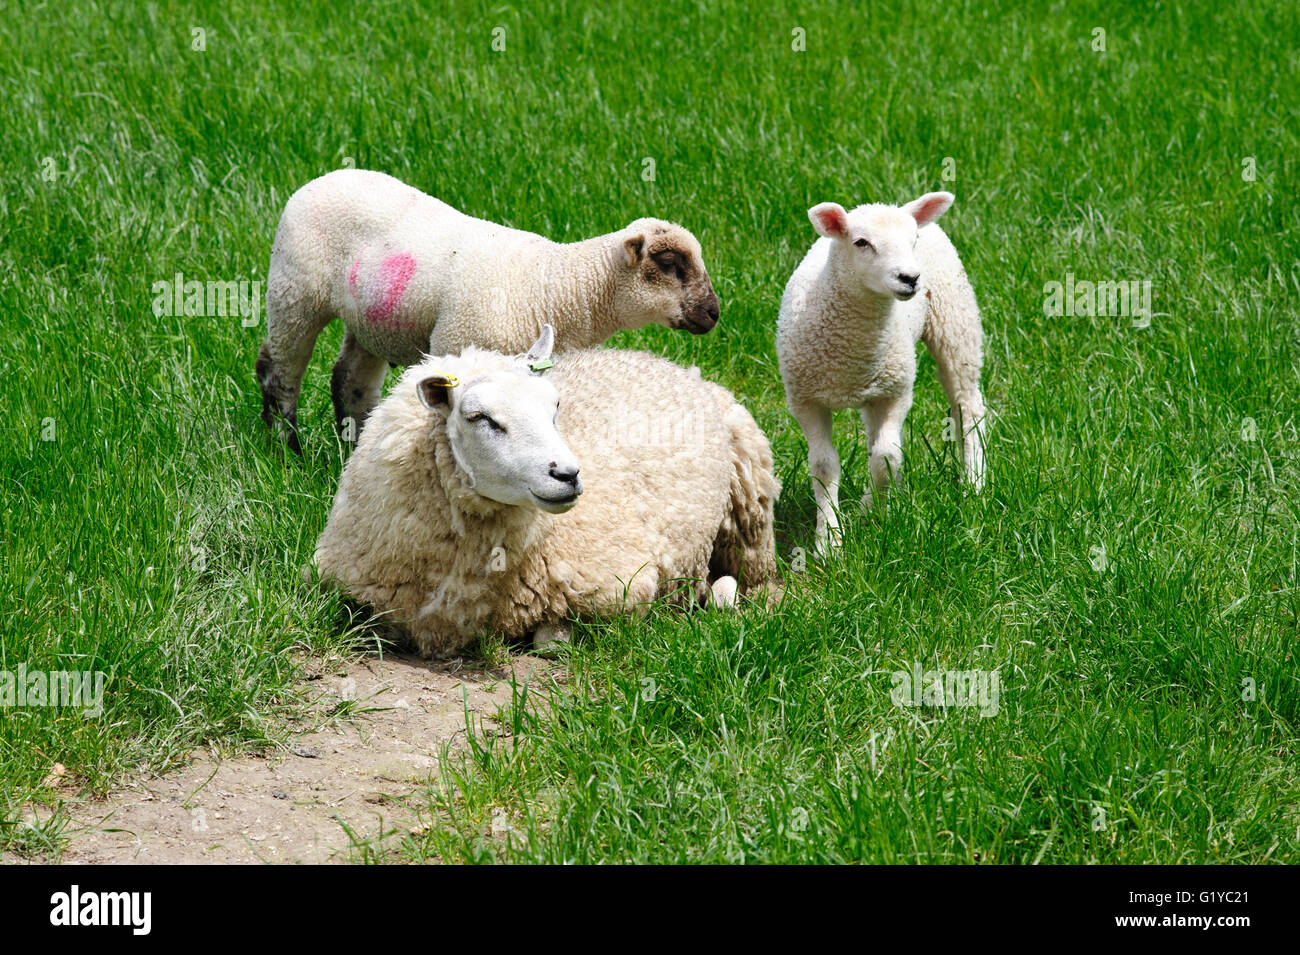 lambs and sheep in rural countryside field england uk Stock Photo